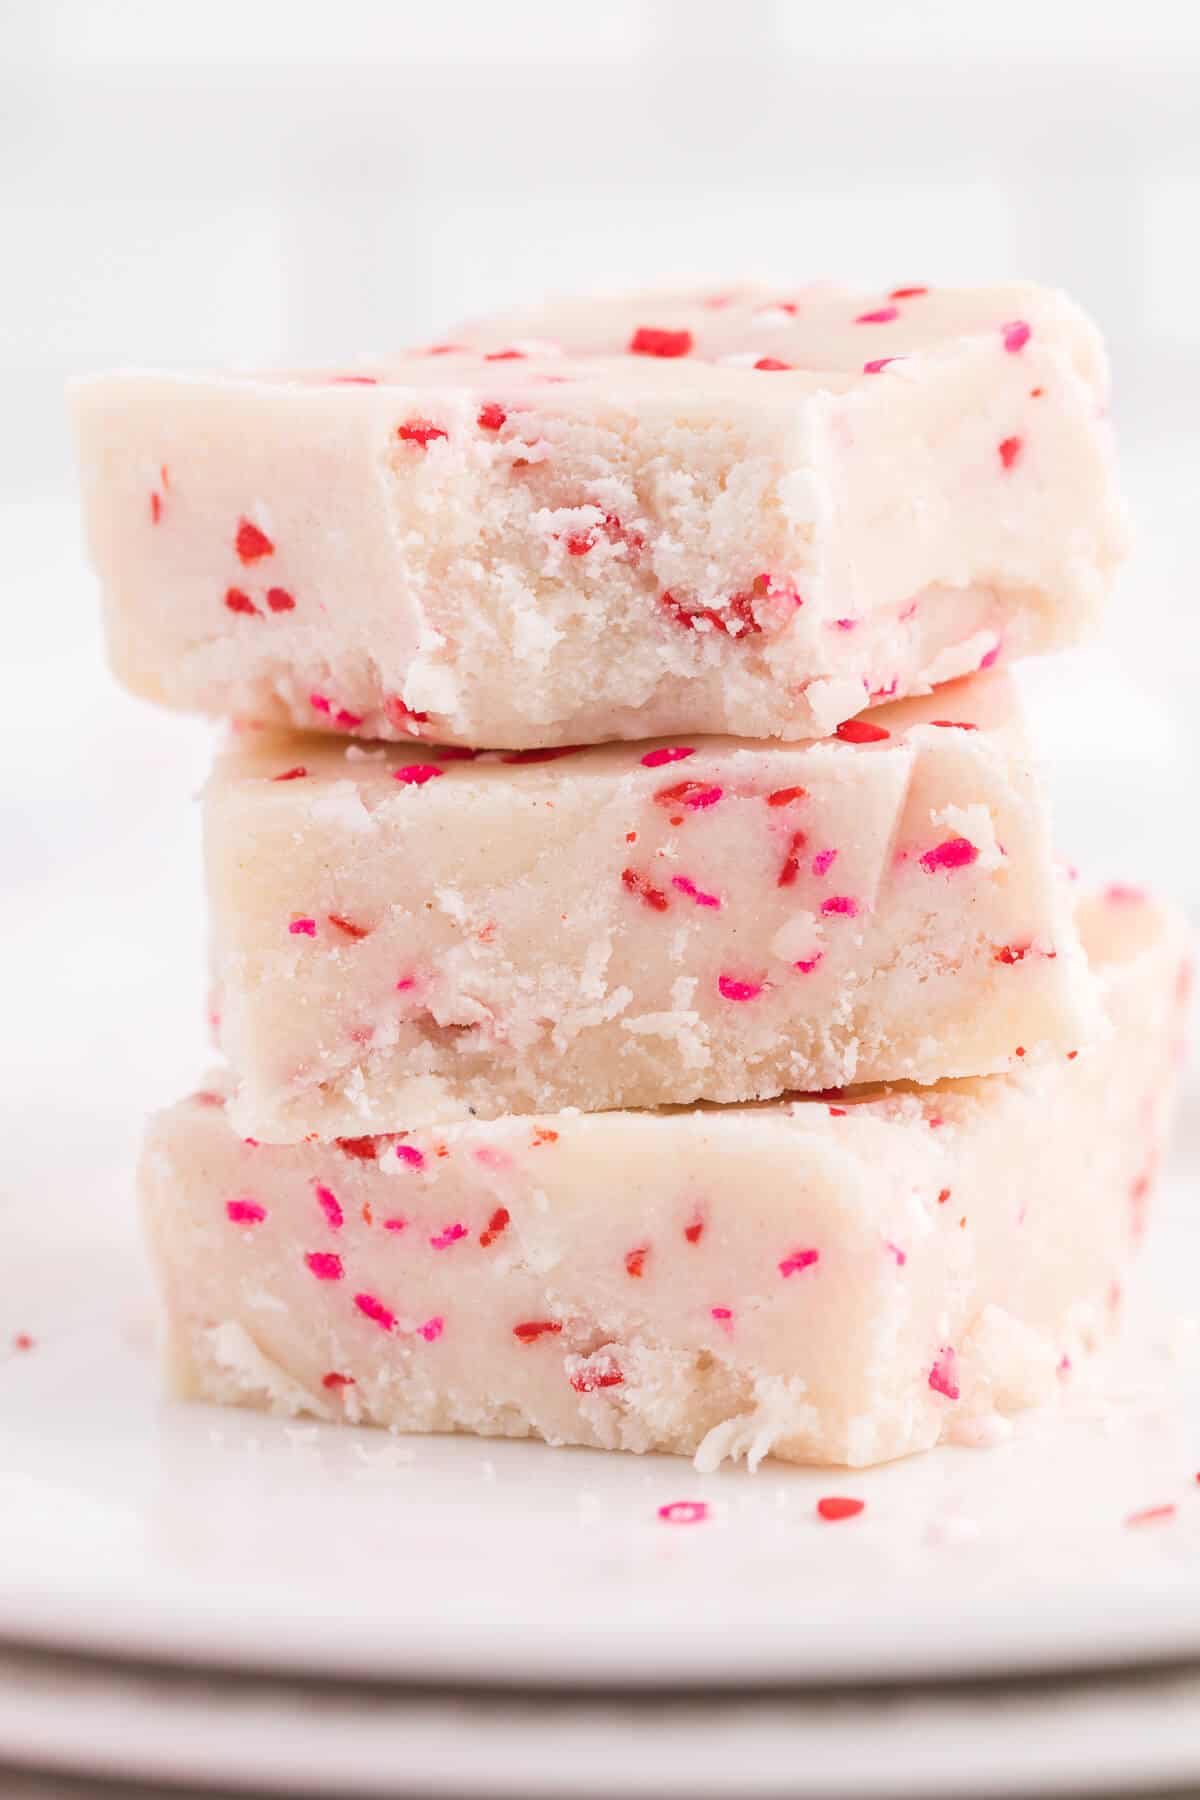 Valentine's Day Fudge - This vanilla "fudge" is made with a secret ingredient - a boxed white cake mix! This versatile sweet treat can be "changed up" by using different flavours of cake mix! It's guaranteed to satisfy your sweet tooth.